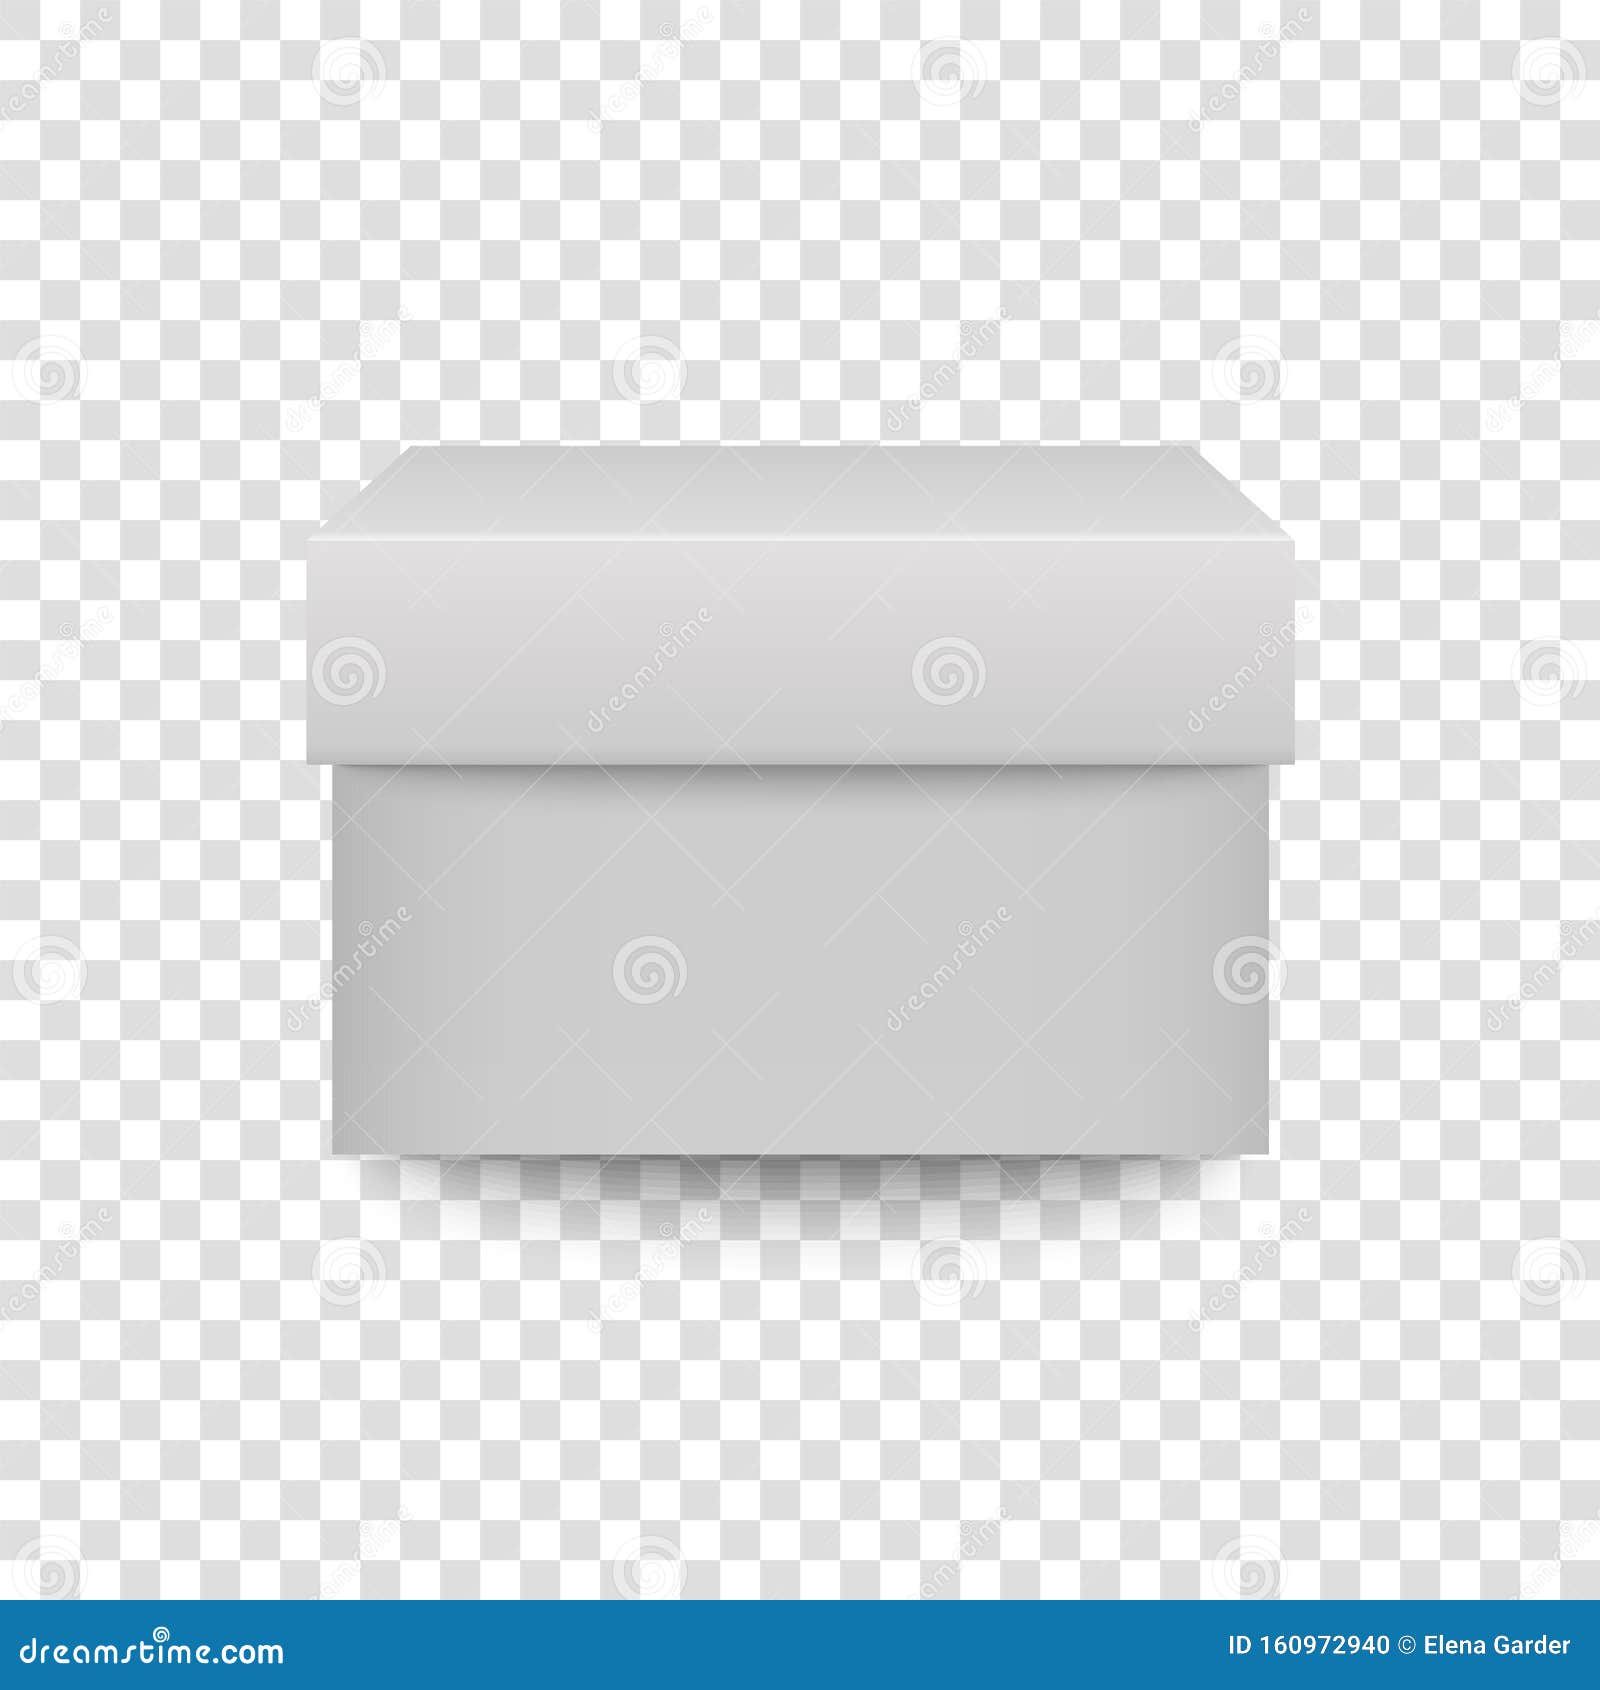 Download White Square Box Isolated On Transparent Background. 3D ...